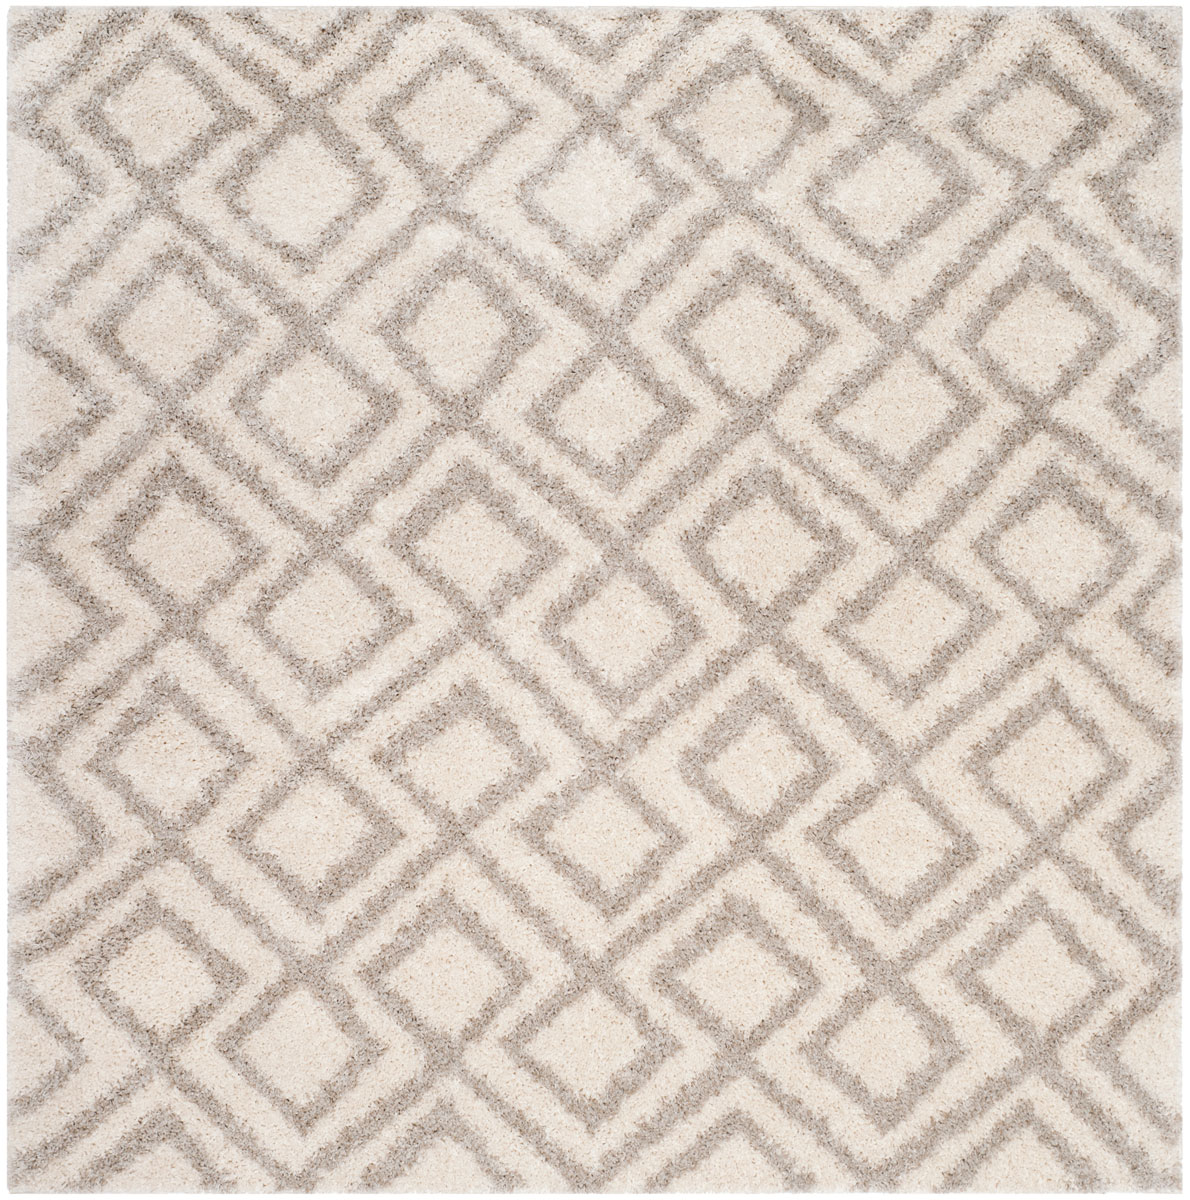 Asg740a-7sq Arizona Shag Square Rug, Ivory & Beige - 6 Ft. - 7 In. X 6 Ft. - 7 In.